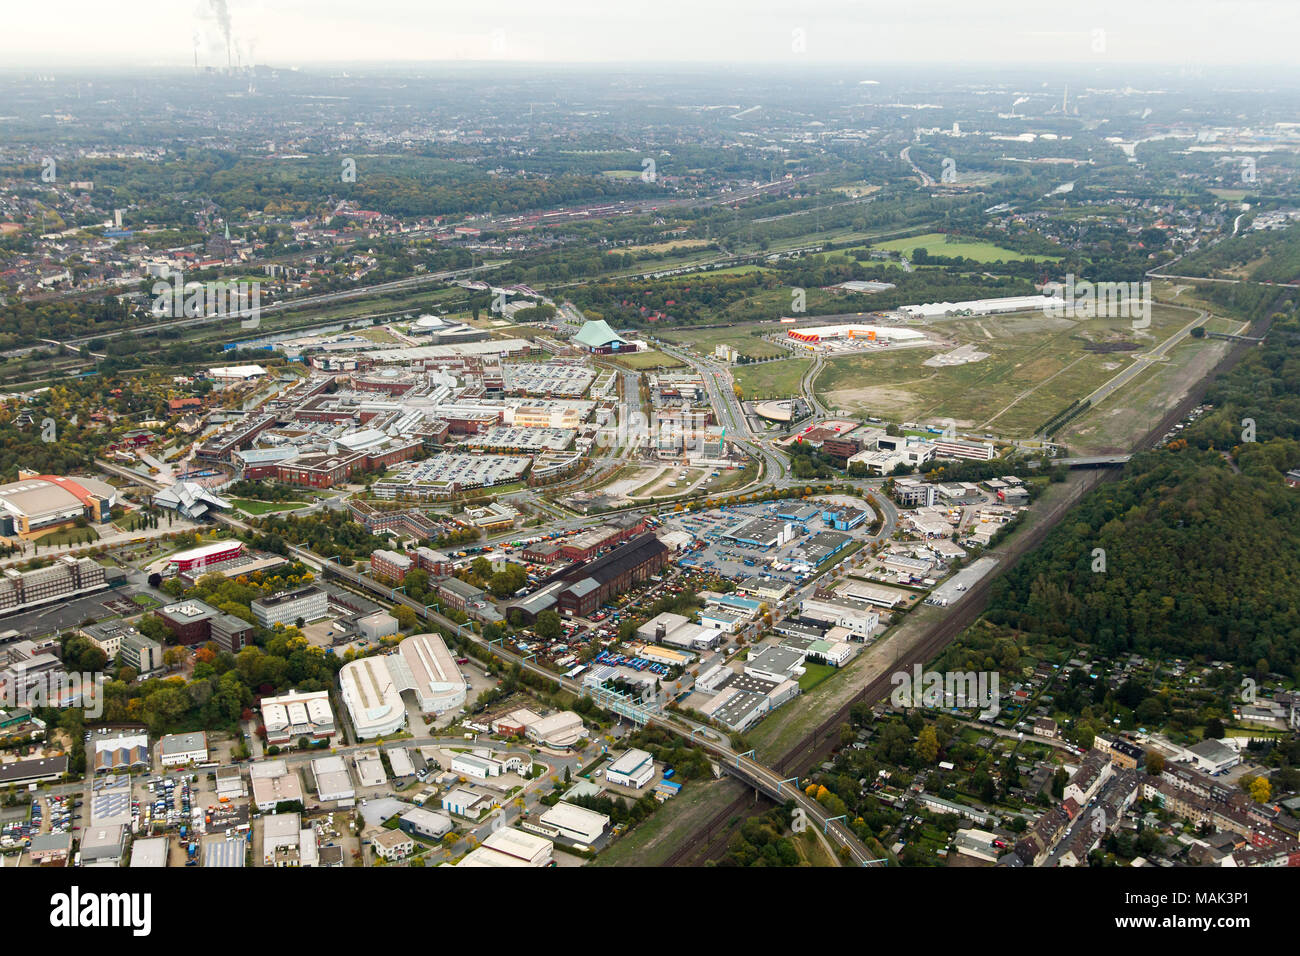 Aerial view, Centro, Neue Mitte, finished cultivation Peek and Cloppenburg, Oberhausen, Ruhr area, North Rhine-Westphalia, Germany, Europe, birds-eyes Stock Photo